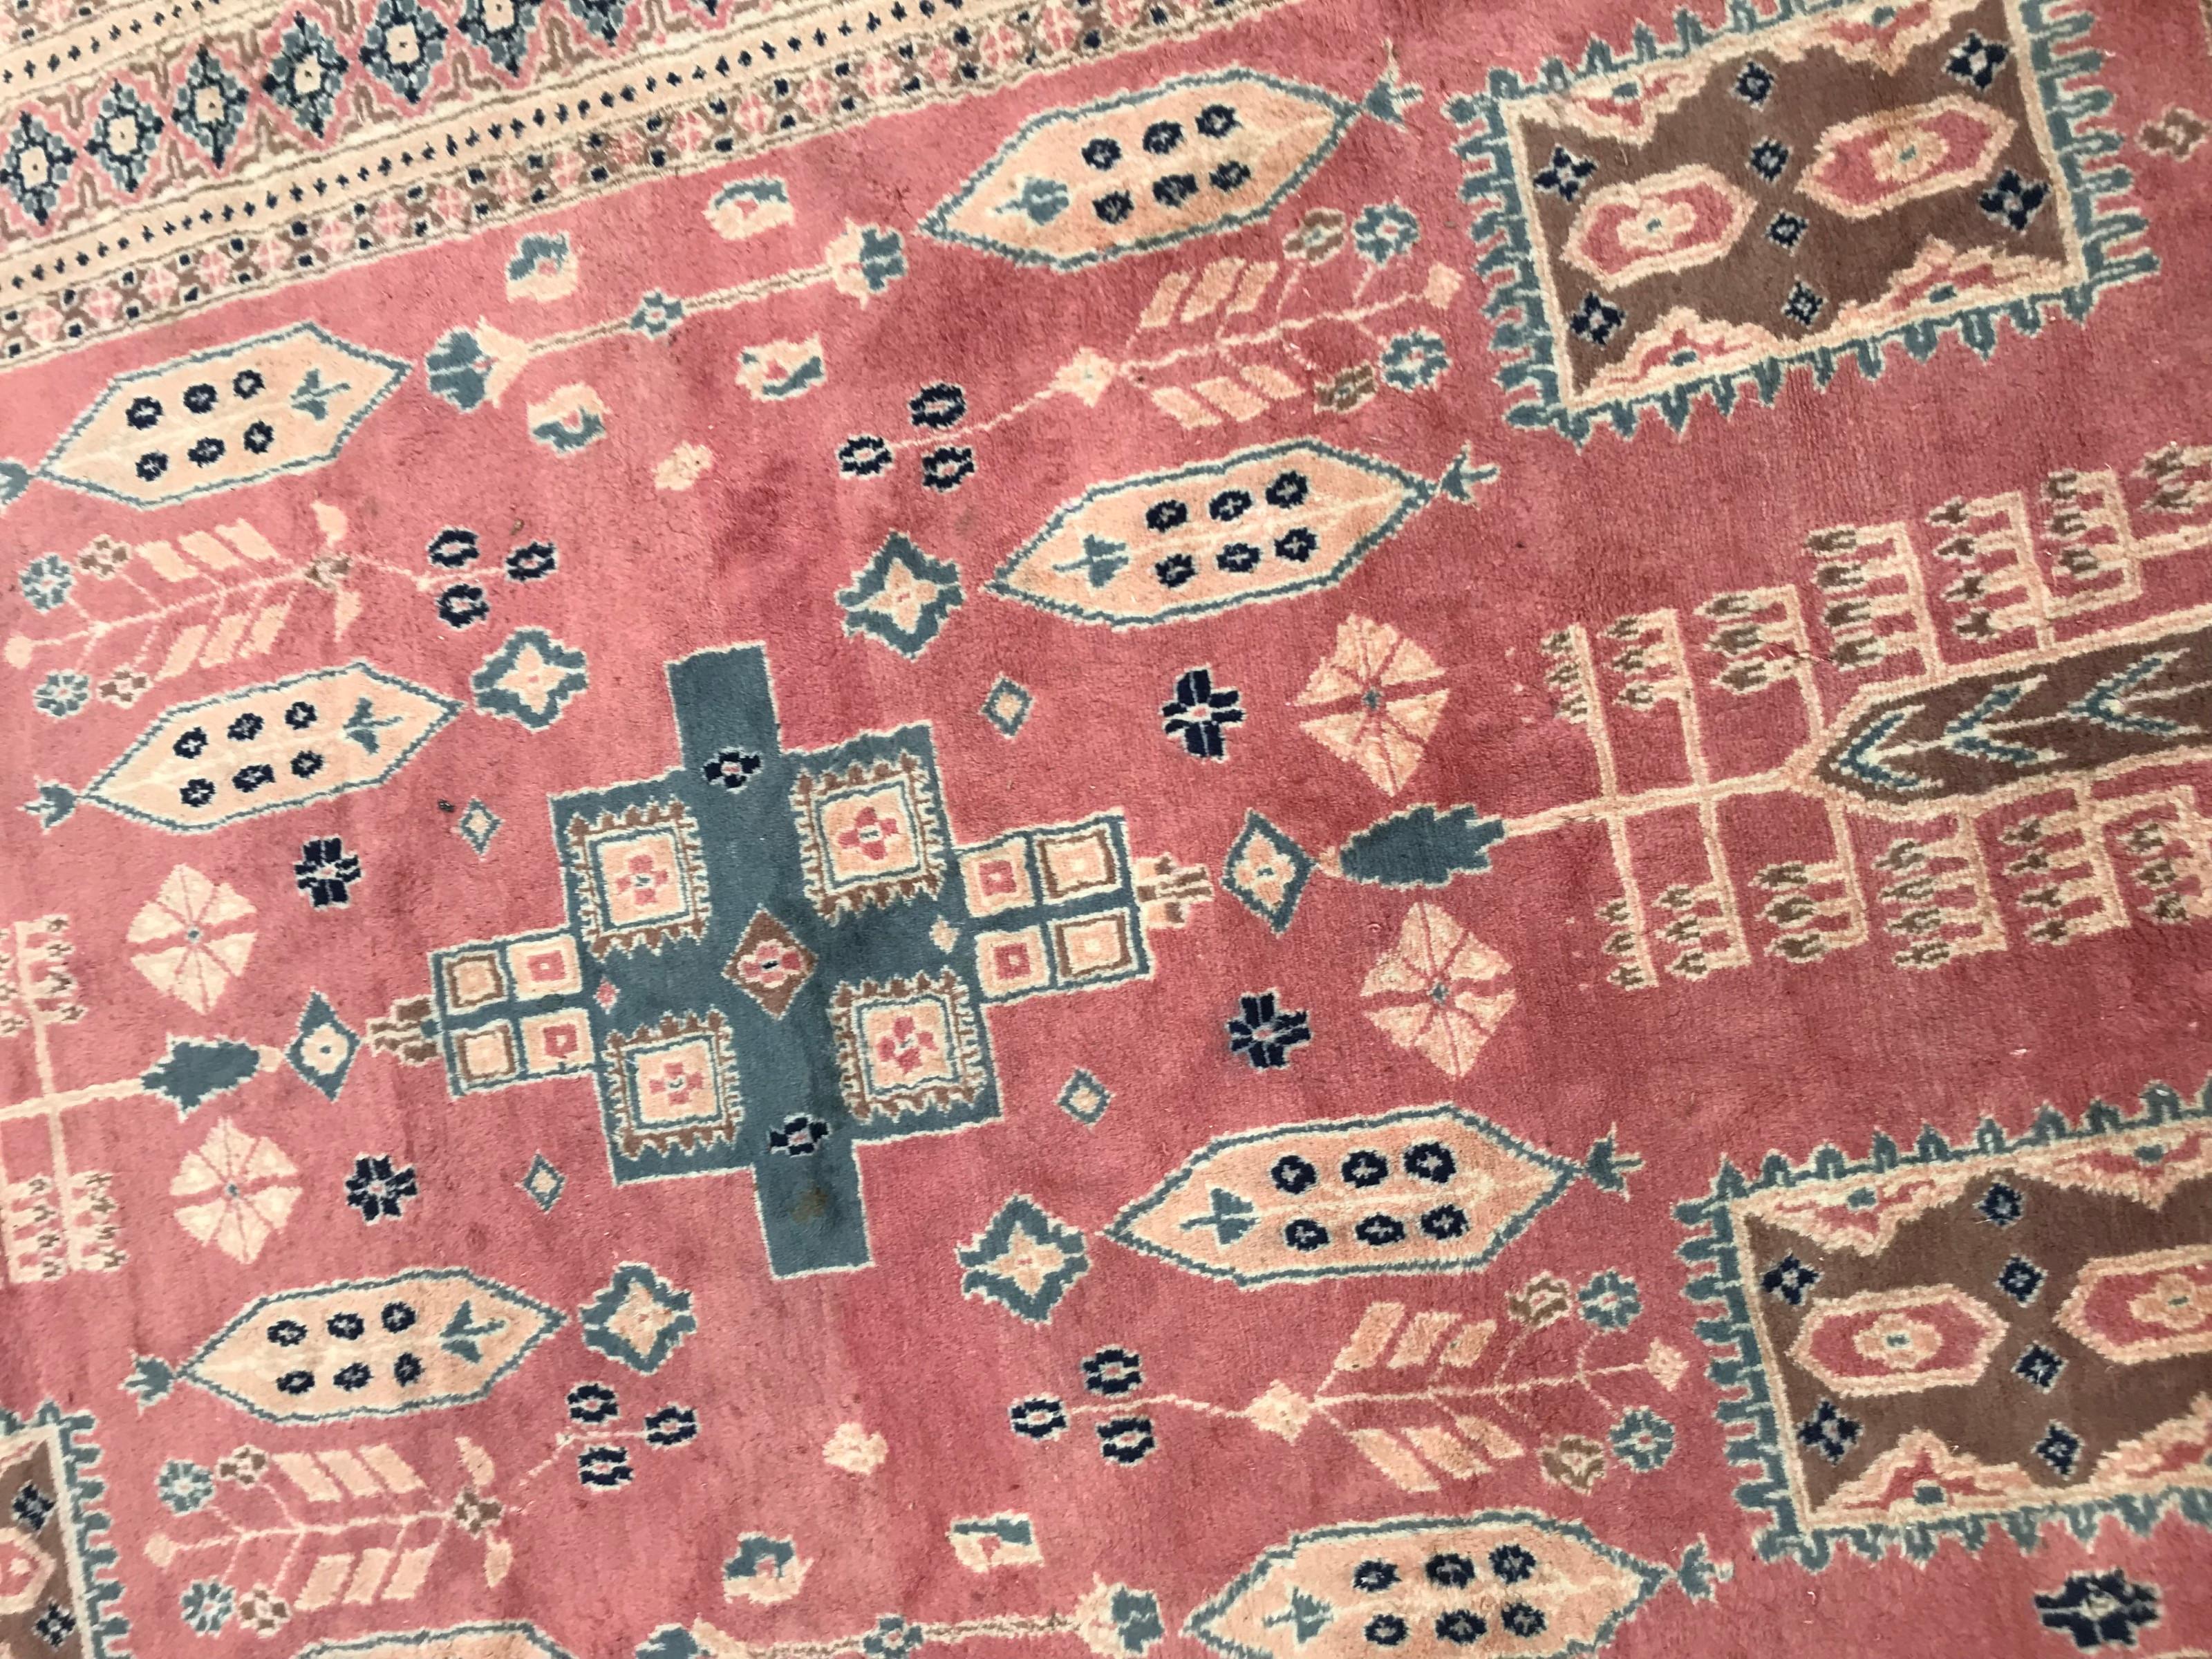 20th century decorative rug from Pakistan with a beautiful design and a pink field colors, entirely hand knotted with wool velvet on cotton foundation.